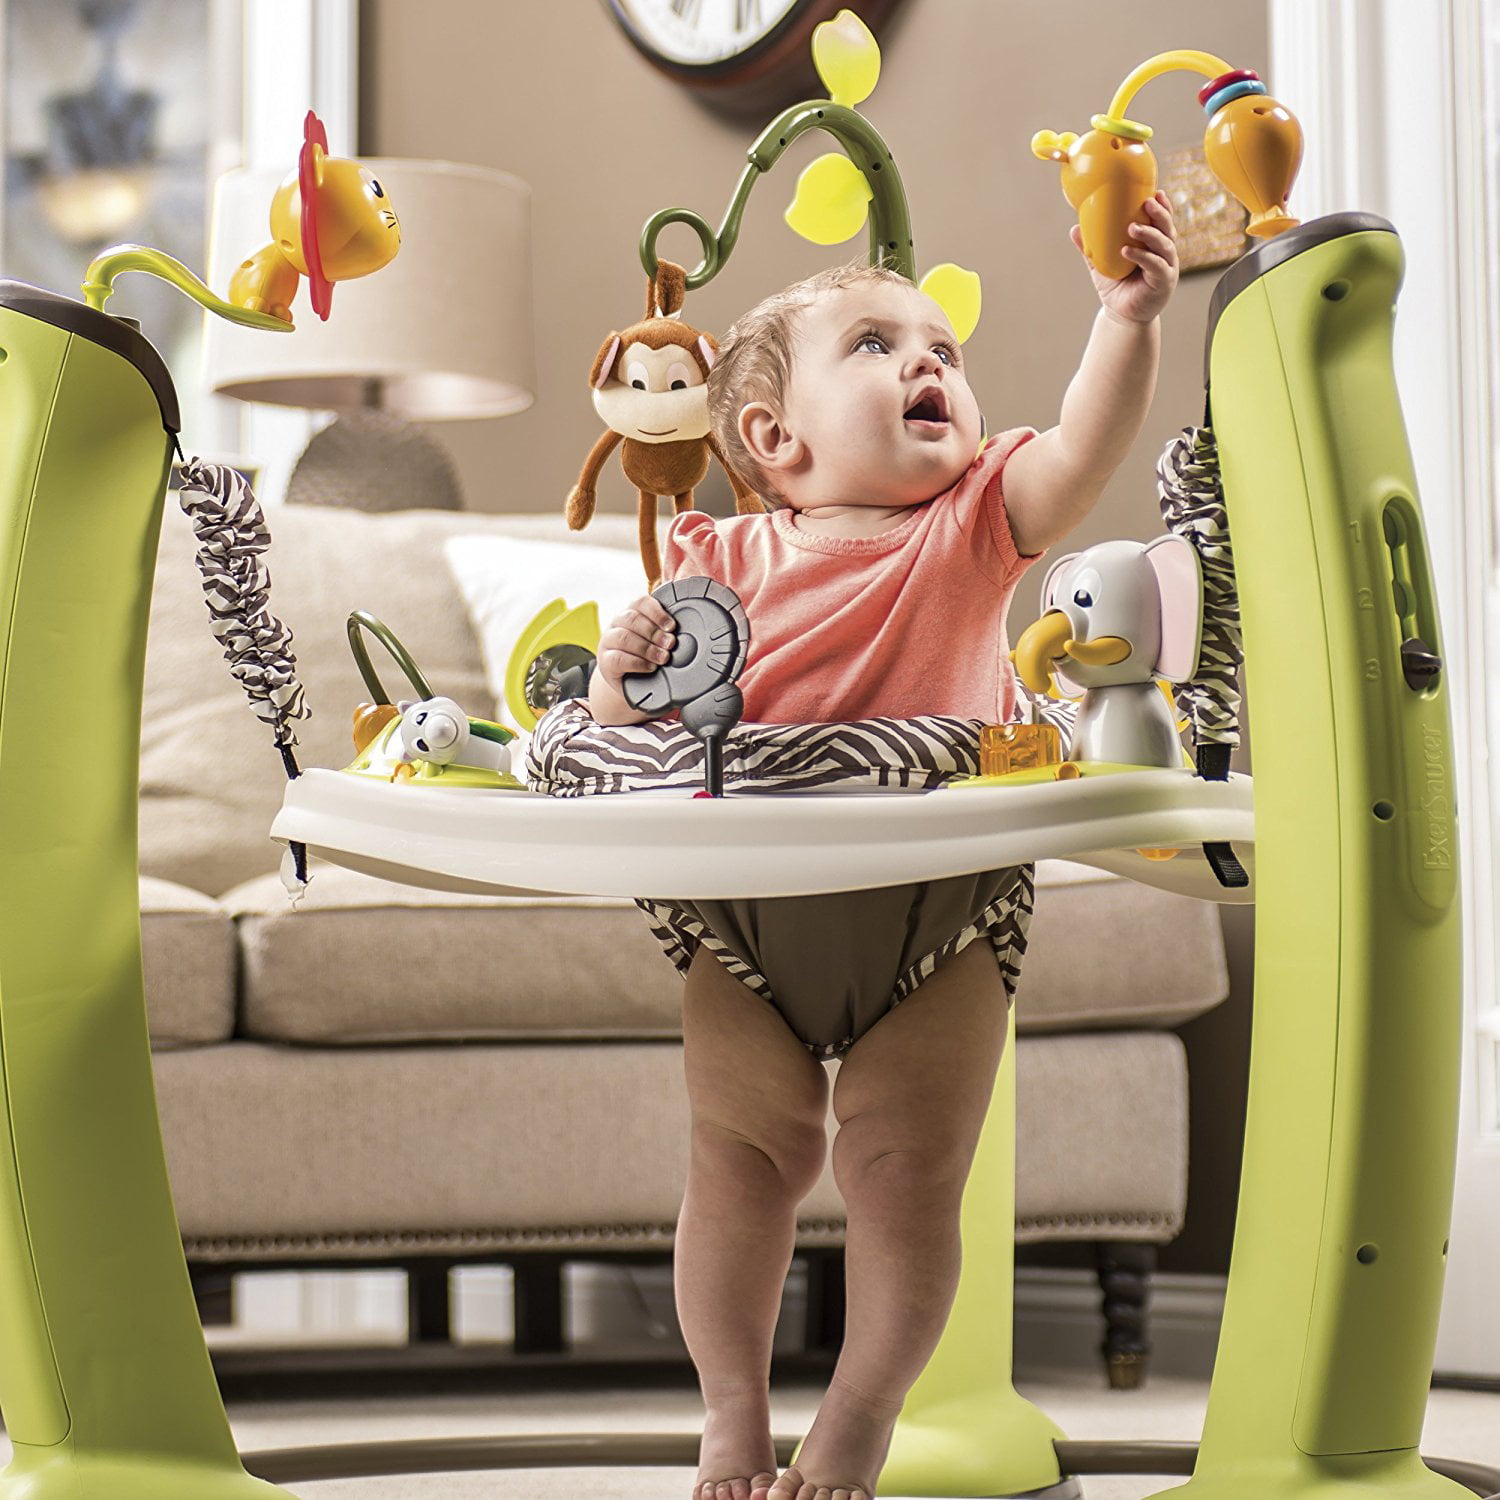 exersaucer jump and learn